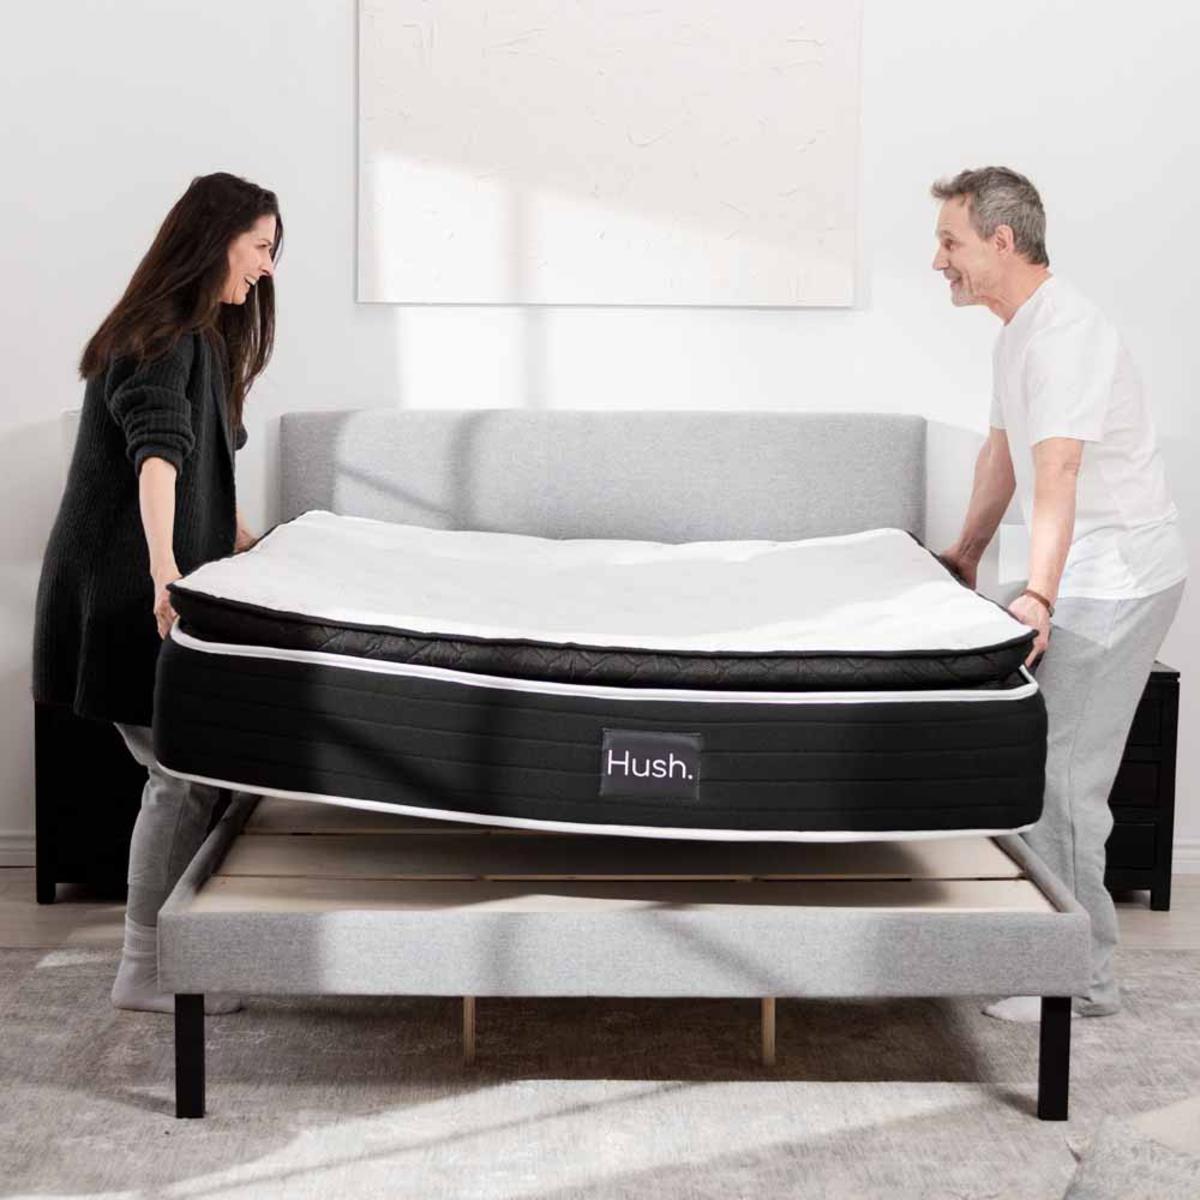 Hush Iced Hybrid 2-in-1 Cooling Mattress with Memory Foam and Springs - Twin/White